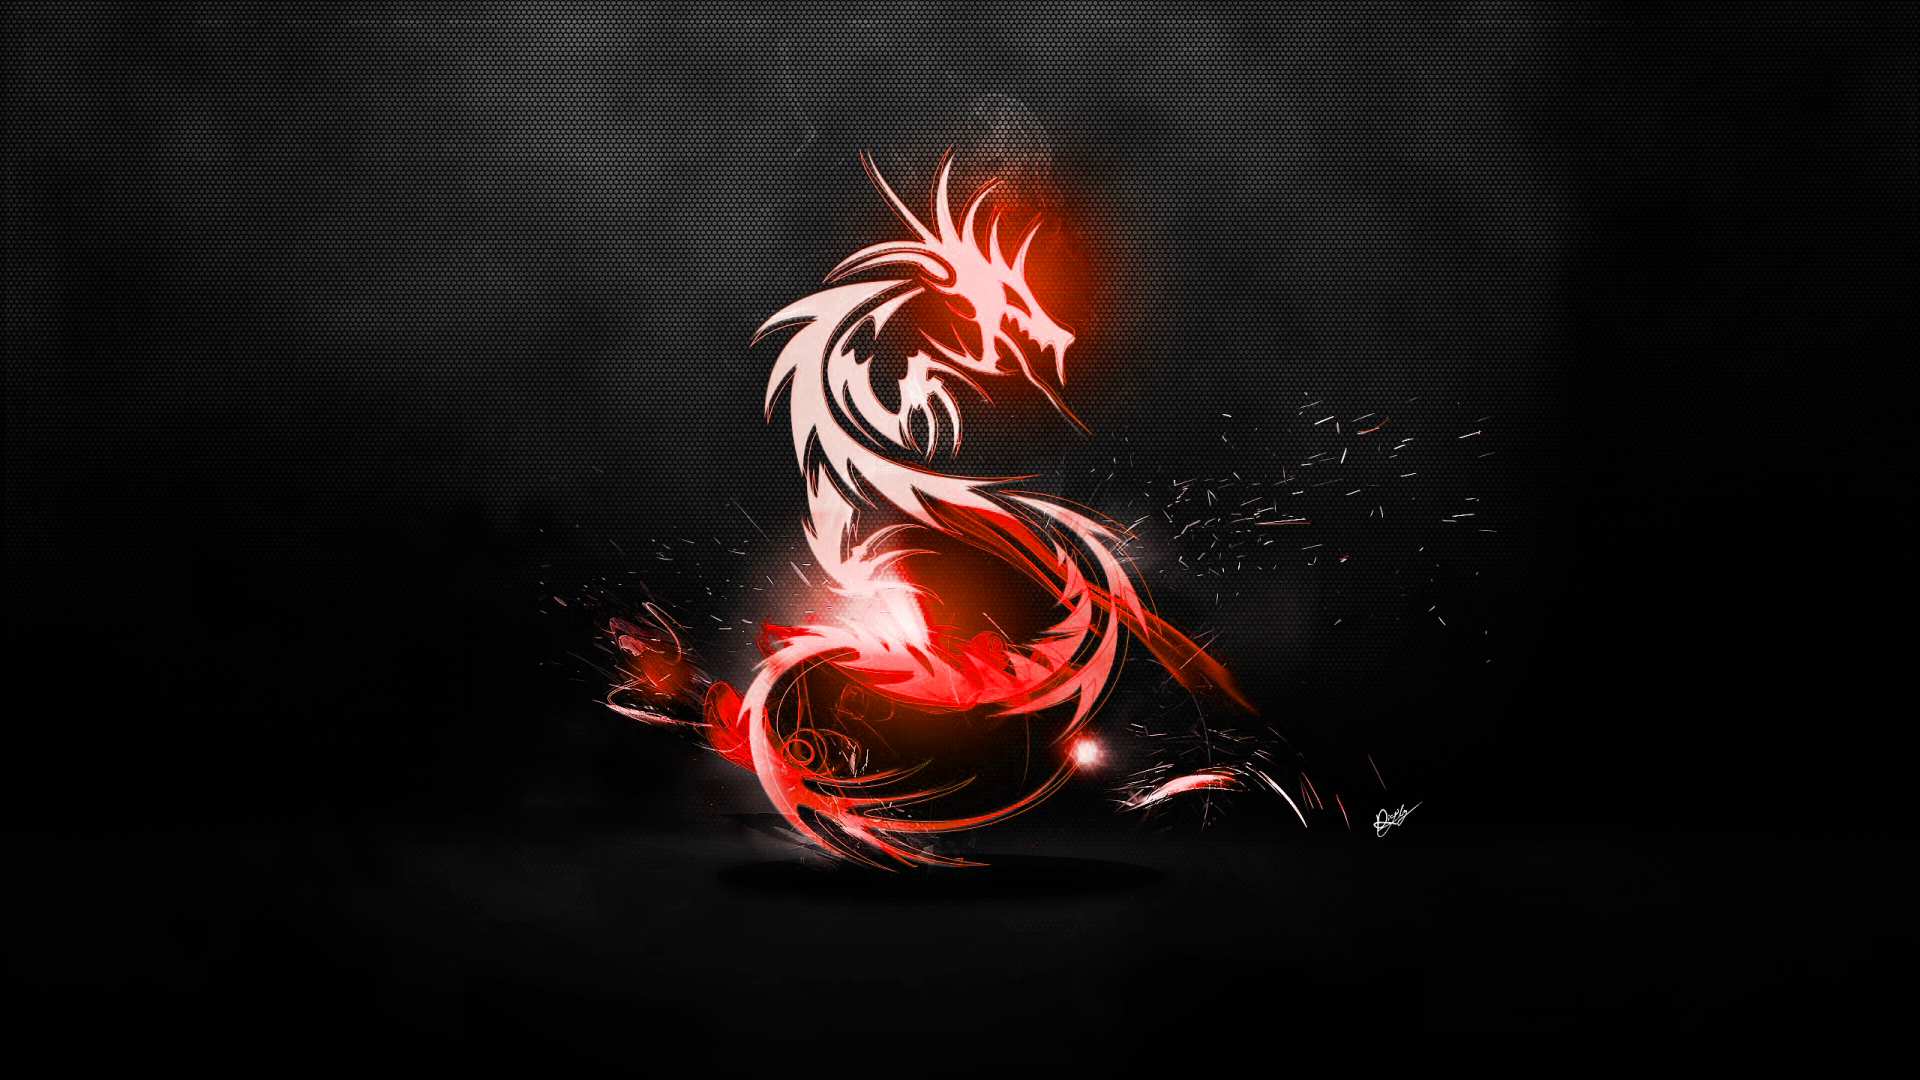 Free download Abstract Dragon Wallpaper Red Carbon Fibre Black By